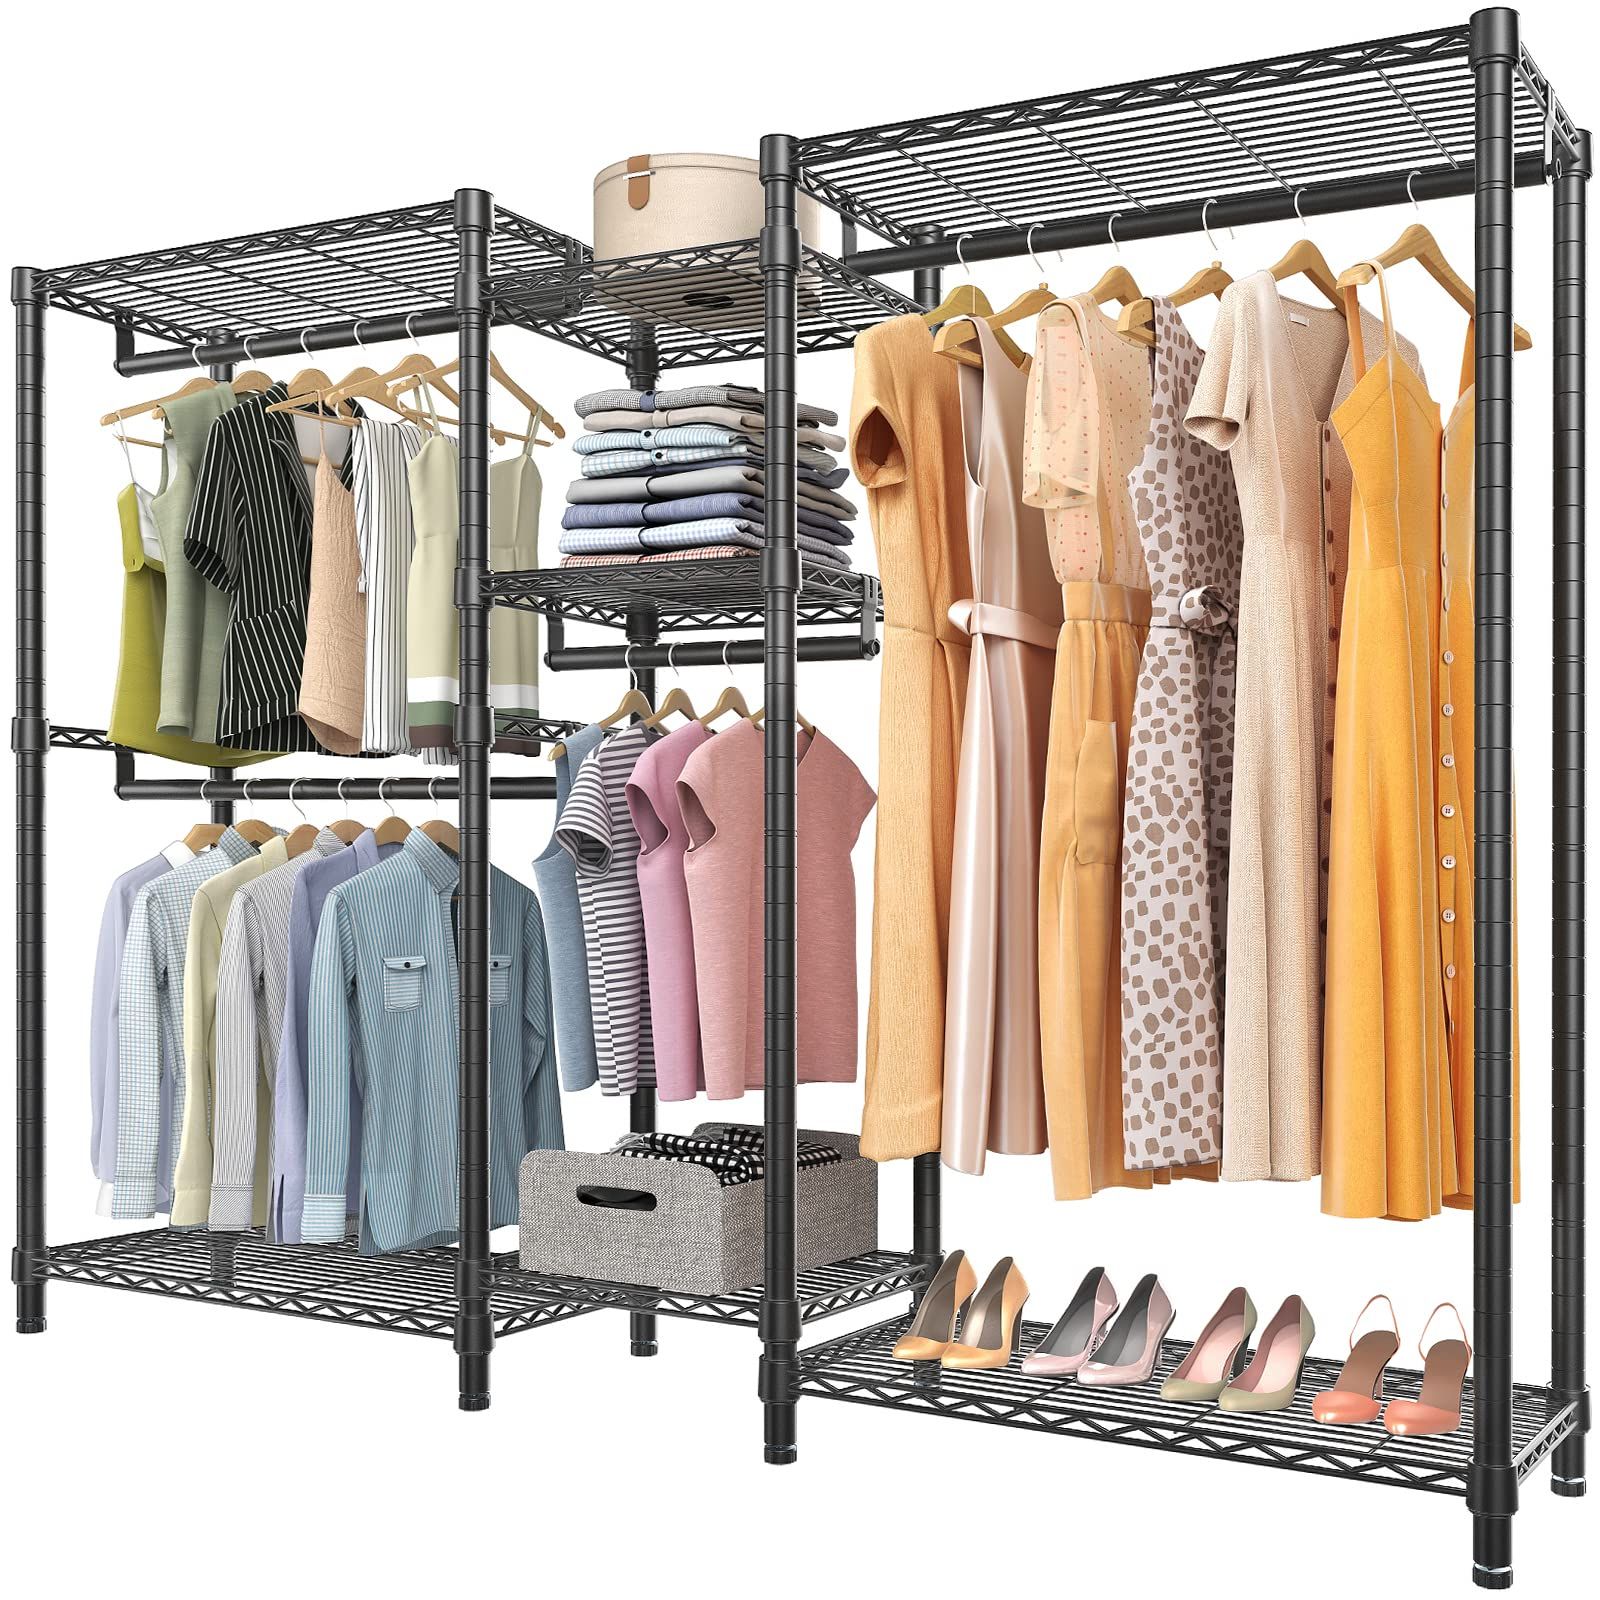 Most Current Wire Garment Rack Wardrobes Intended For Amazon: Vipek V6 Wire Garment Rack Heavy Duty Clothes Rack Metal With  Shelves, Freestanding Portable Wardrobe Closet Rack For Hanging Clothes  74.4" L X 17.7" W X  (View 2 of 10)